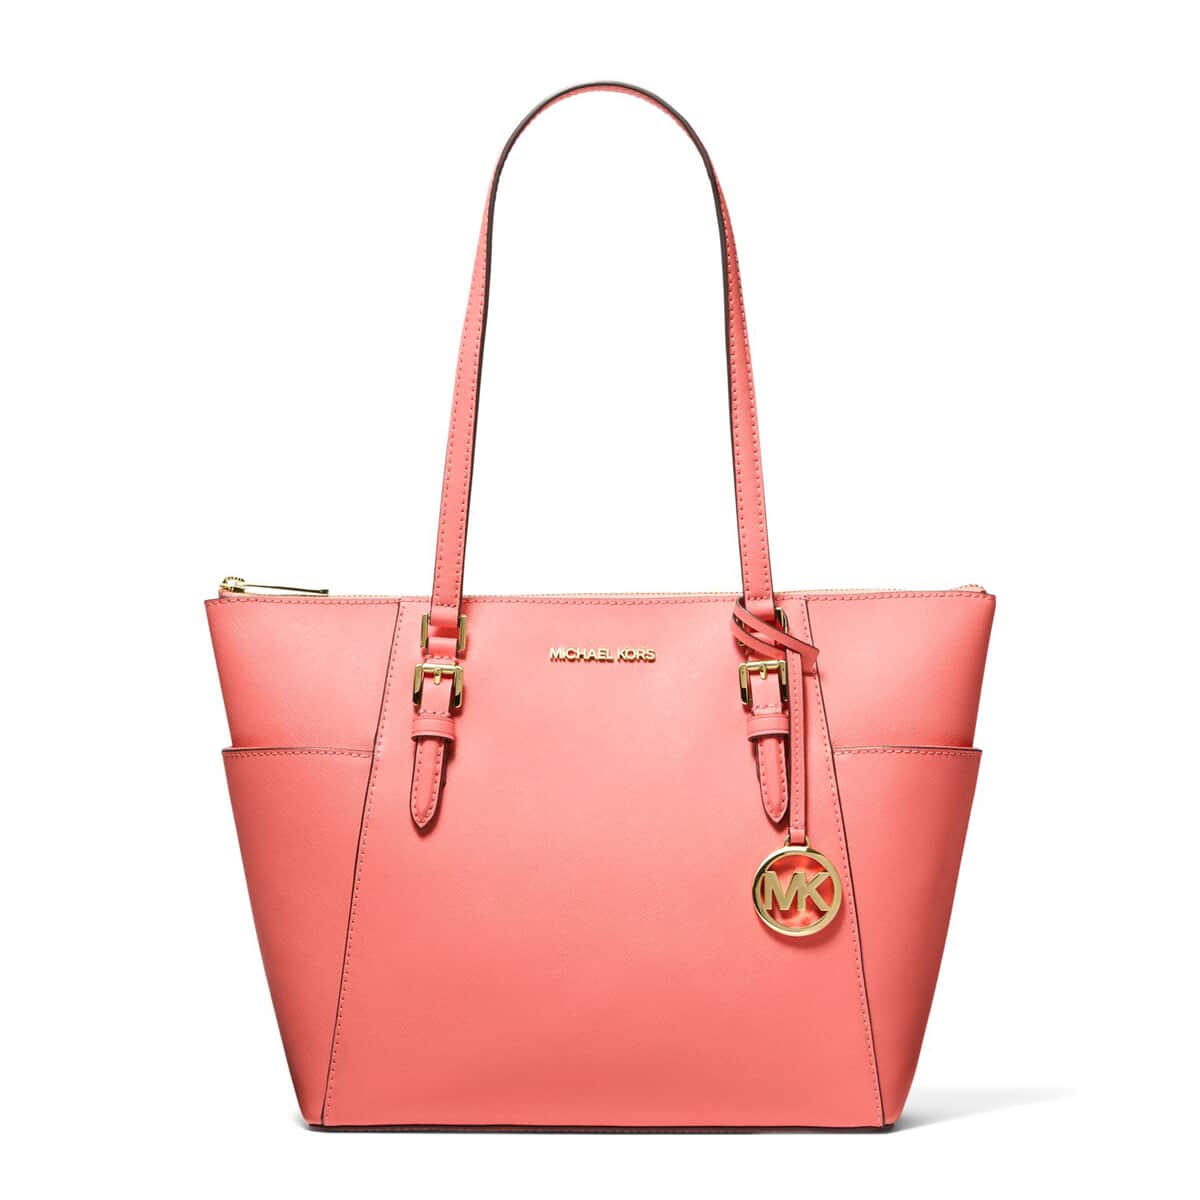 Michael Kors Cherry Charlotte Large Saffiano Leather Top-Zip Tote Bag (Ships in 8-10 Business Days)  image number 0